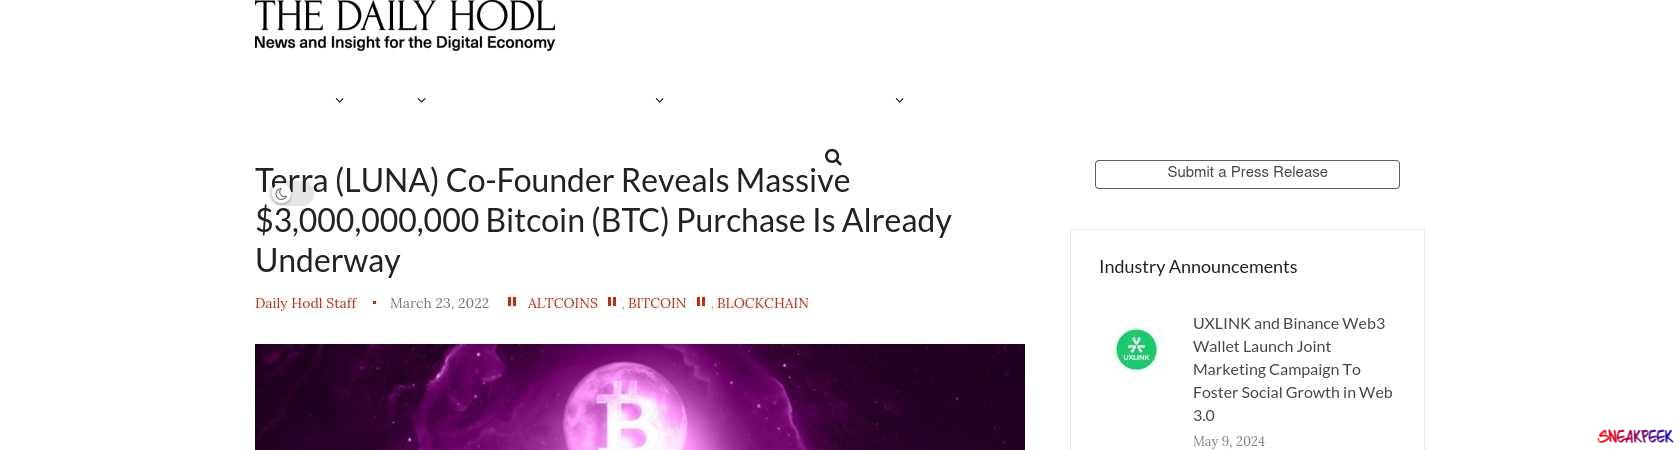 Read the full Article:  ⭲ Terra (LUNA) Co-Founder Reveals Massive $3,000,000,000 Bitcoin (BTC) Purchase Is Already Underway